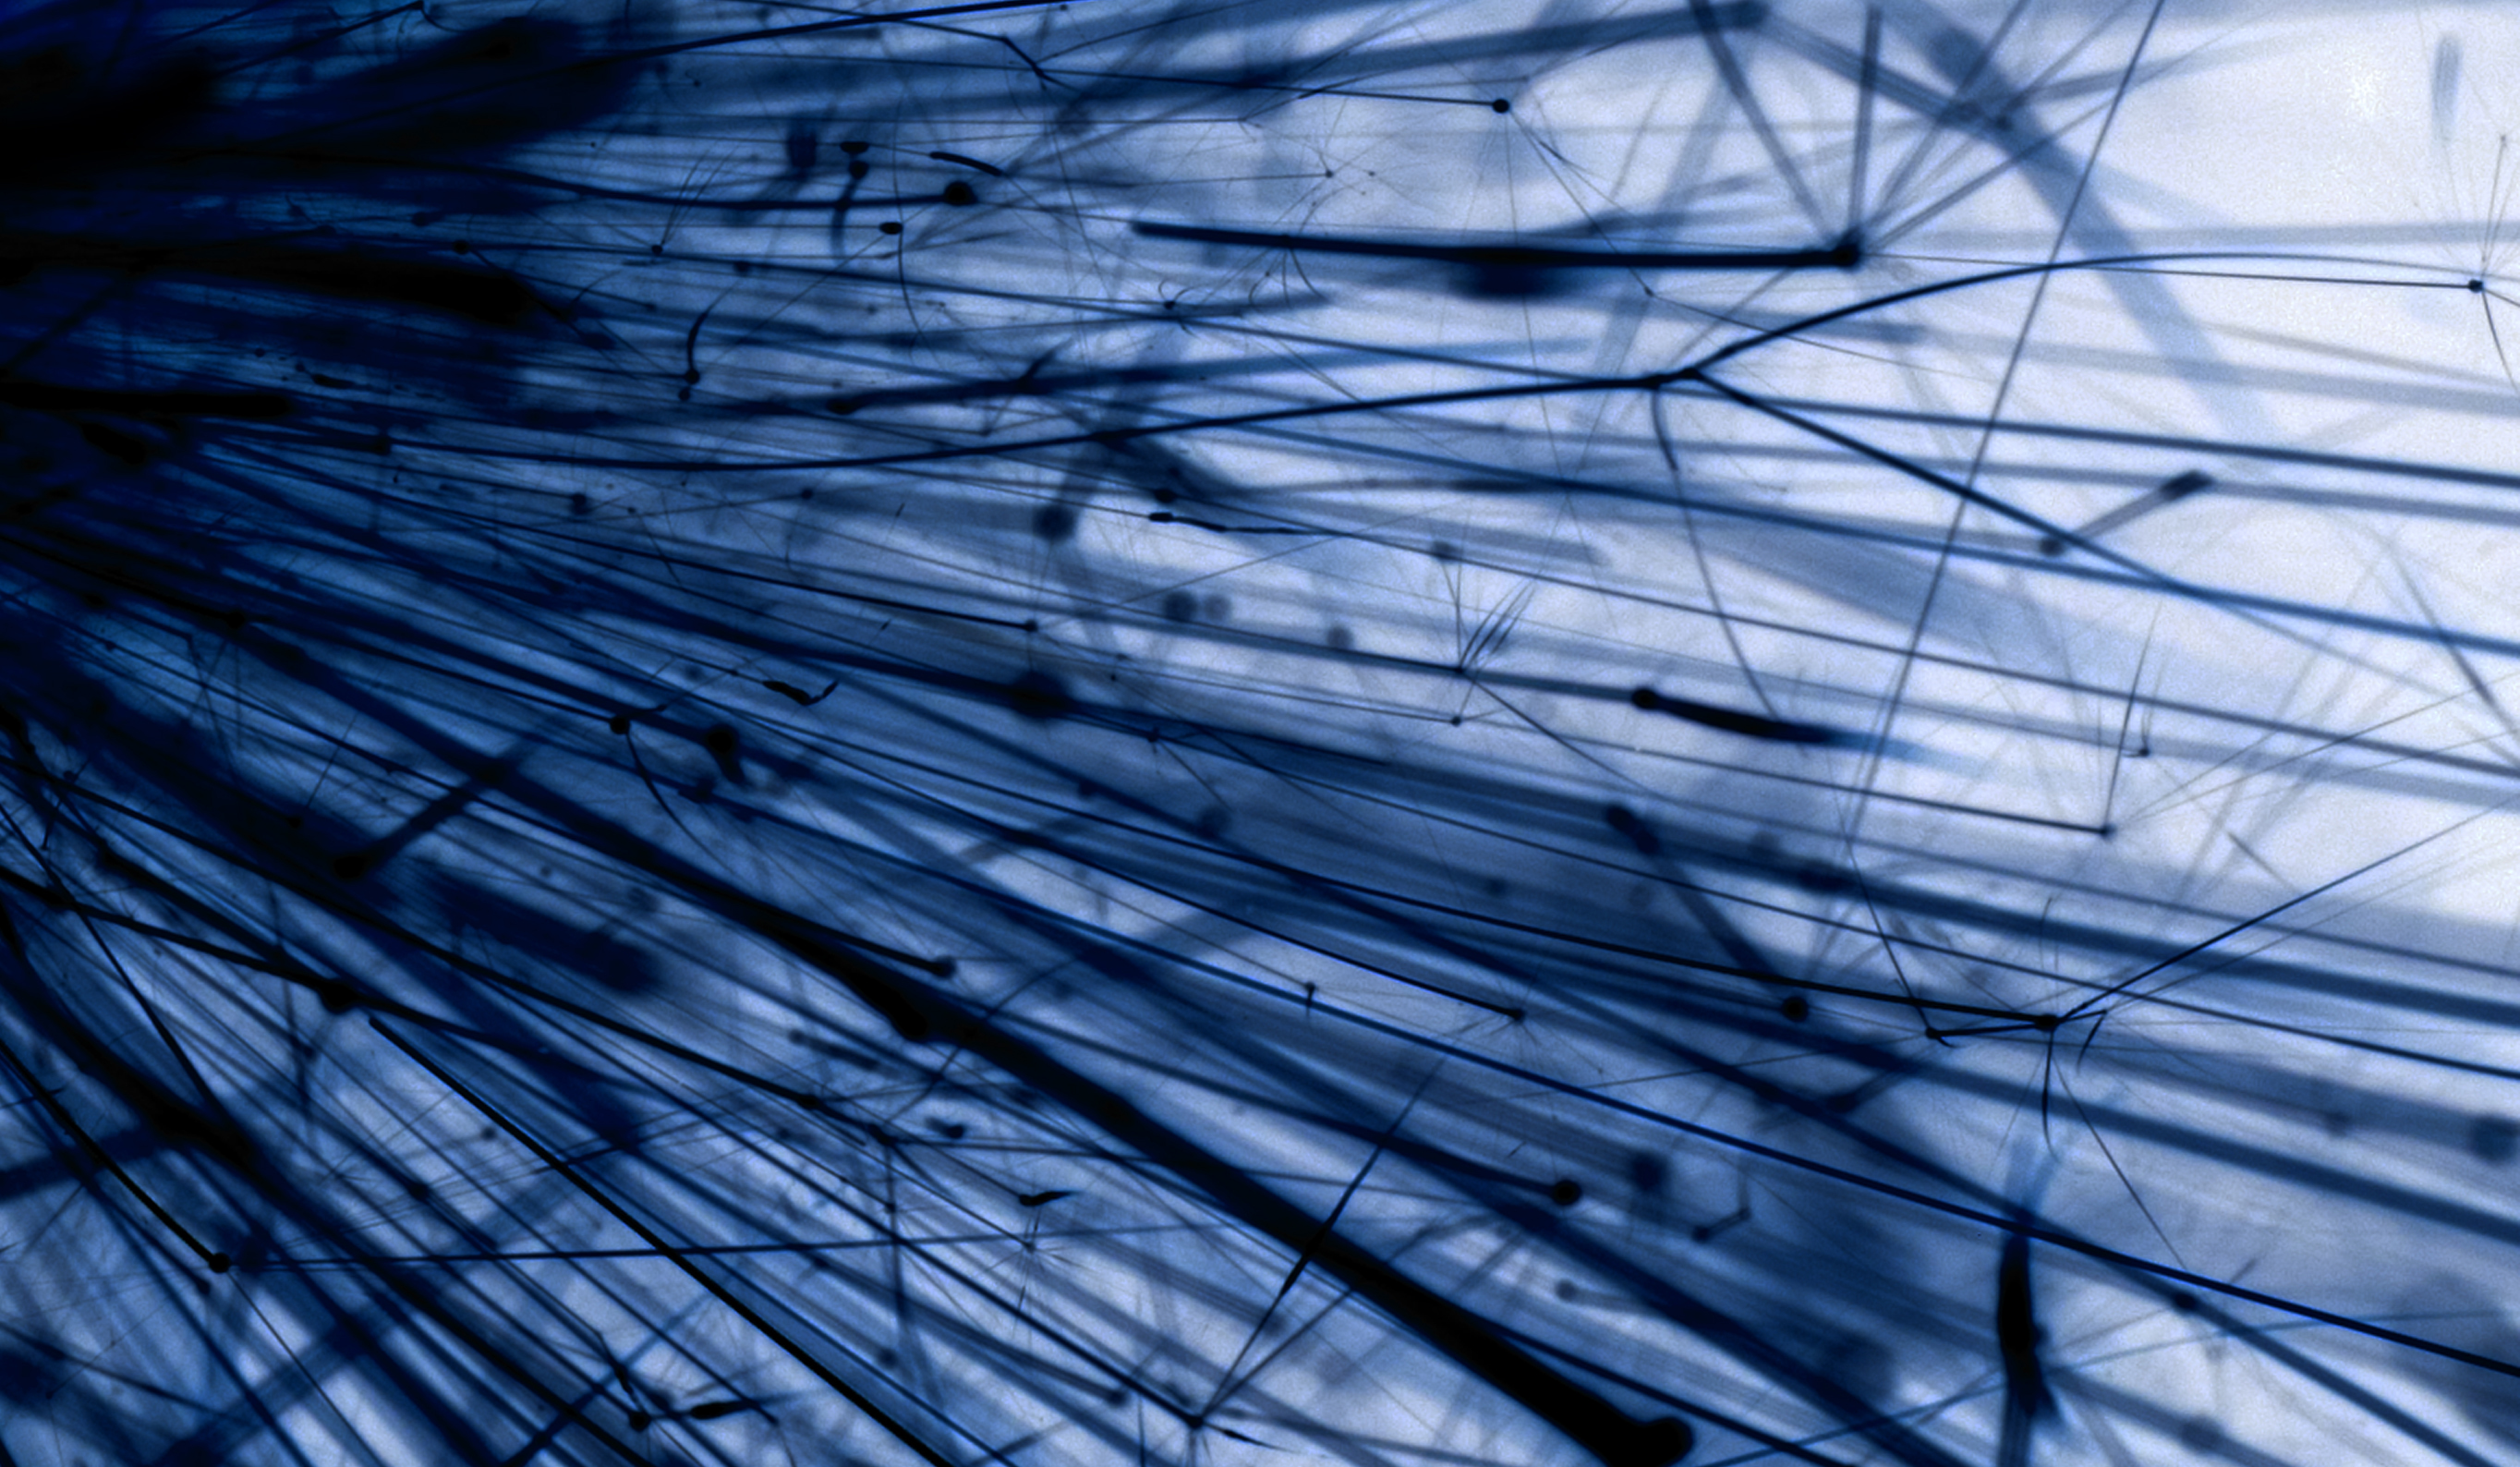 Image of a close up of a dandelion in hues of blue